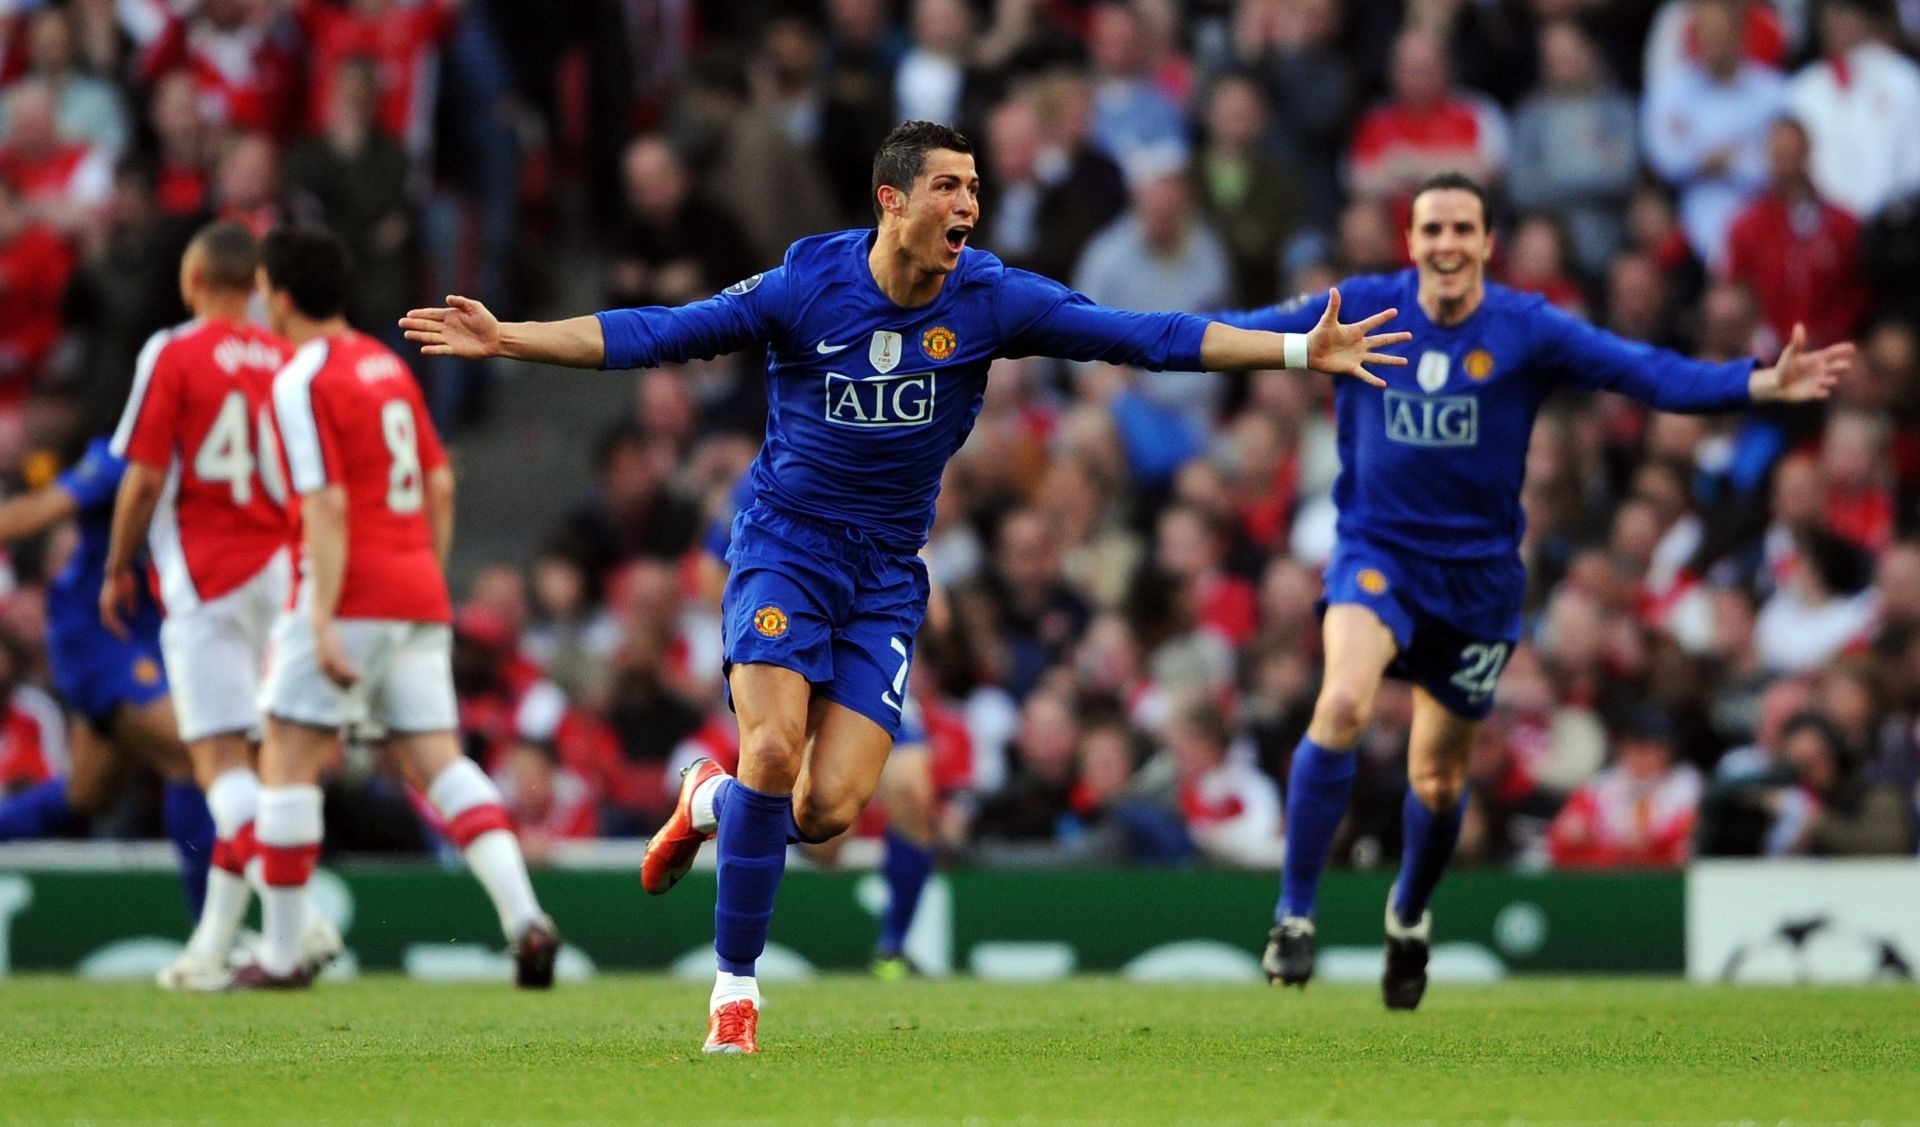 Ronaldo against Arsenal in the Champions League